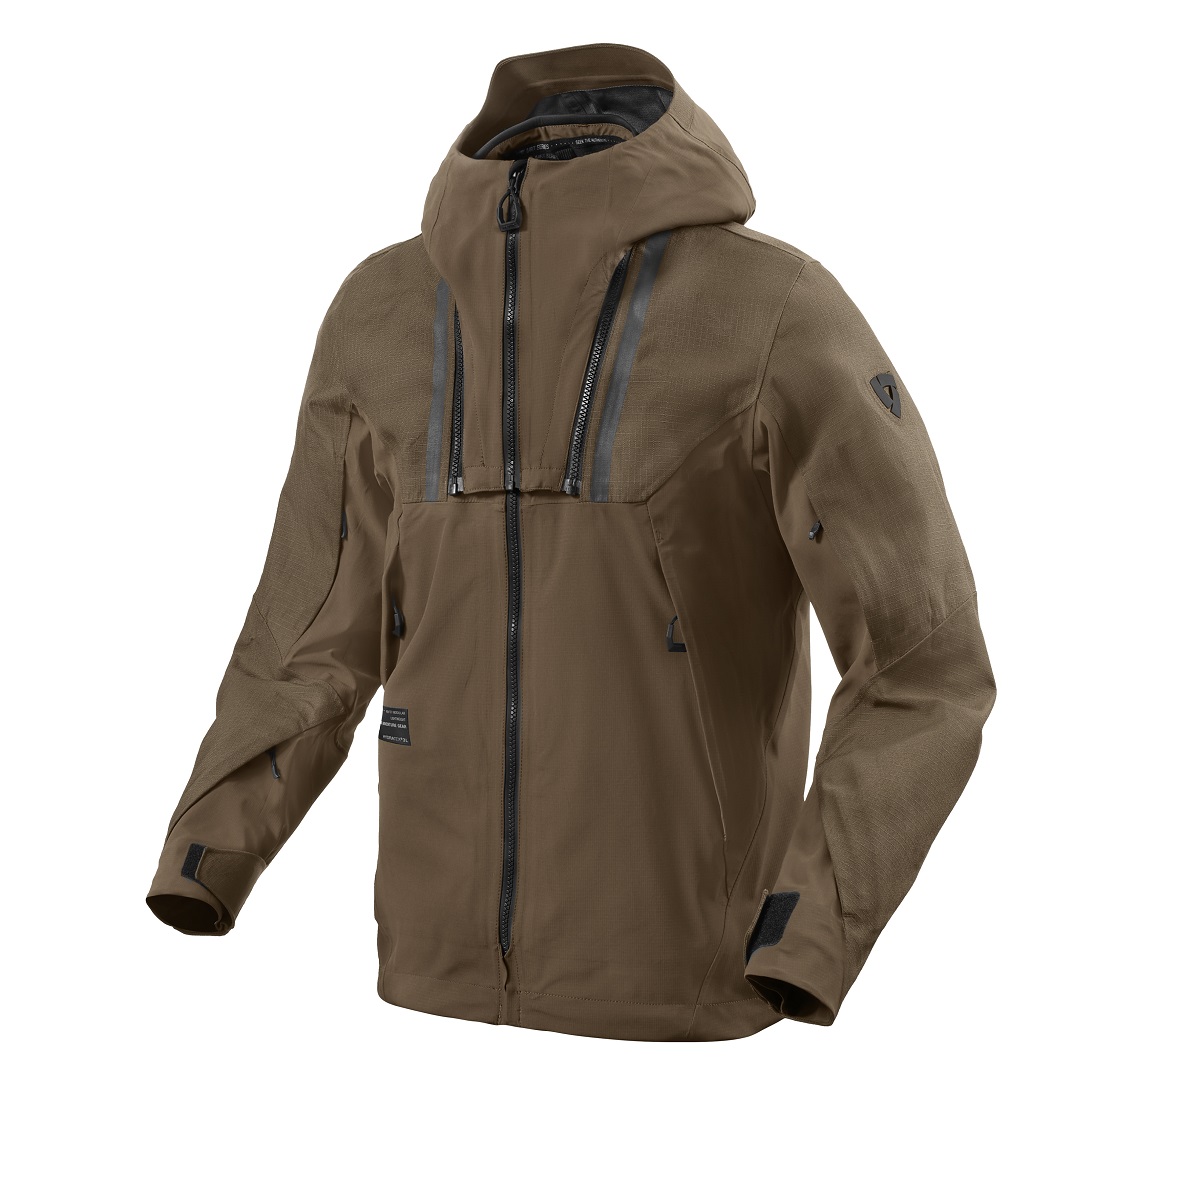 REV'IT! COMPONENT 2 H2O JACKET BROWN - P&H Motorcycles